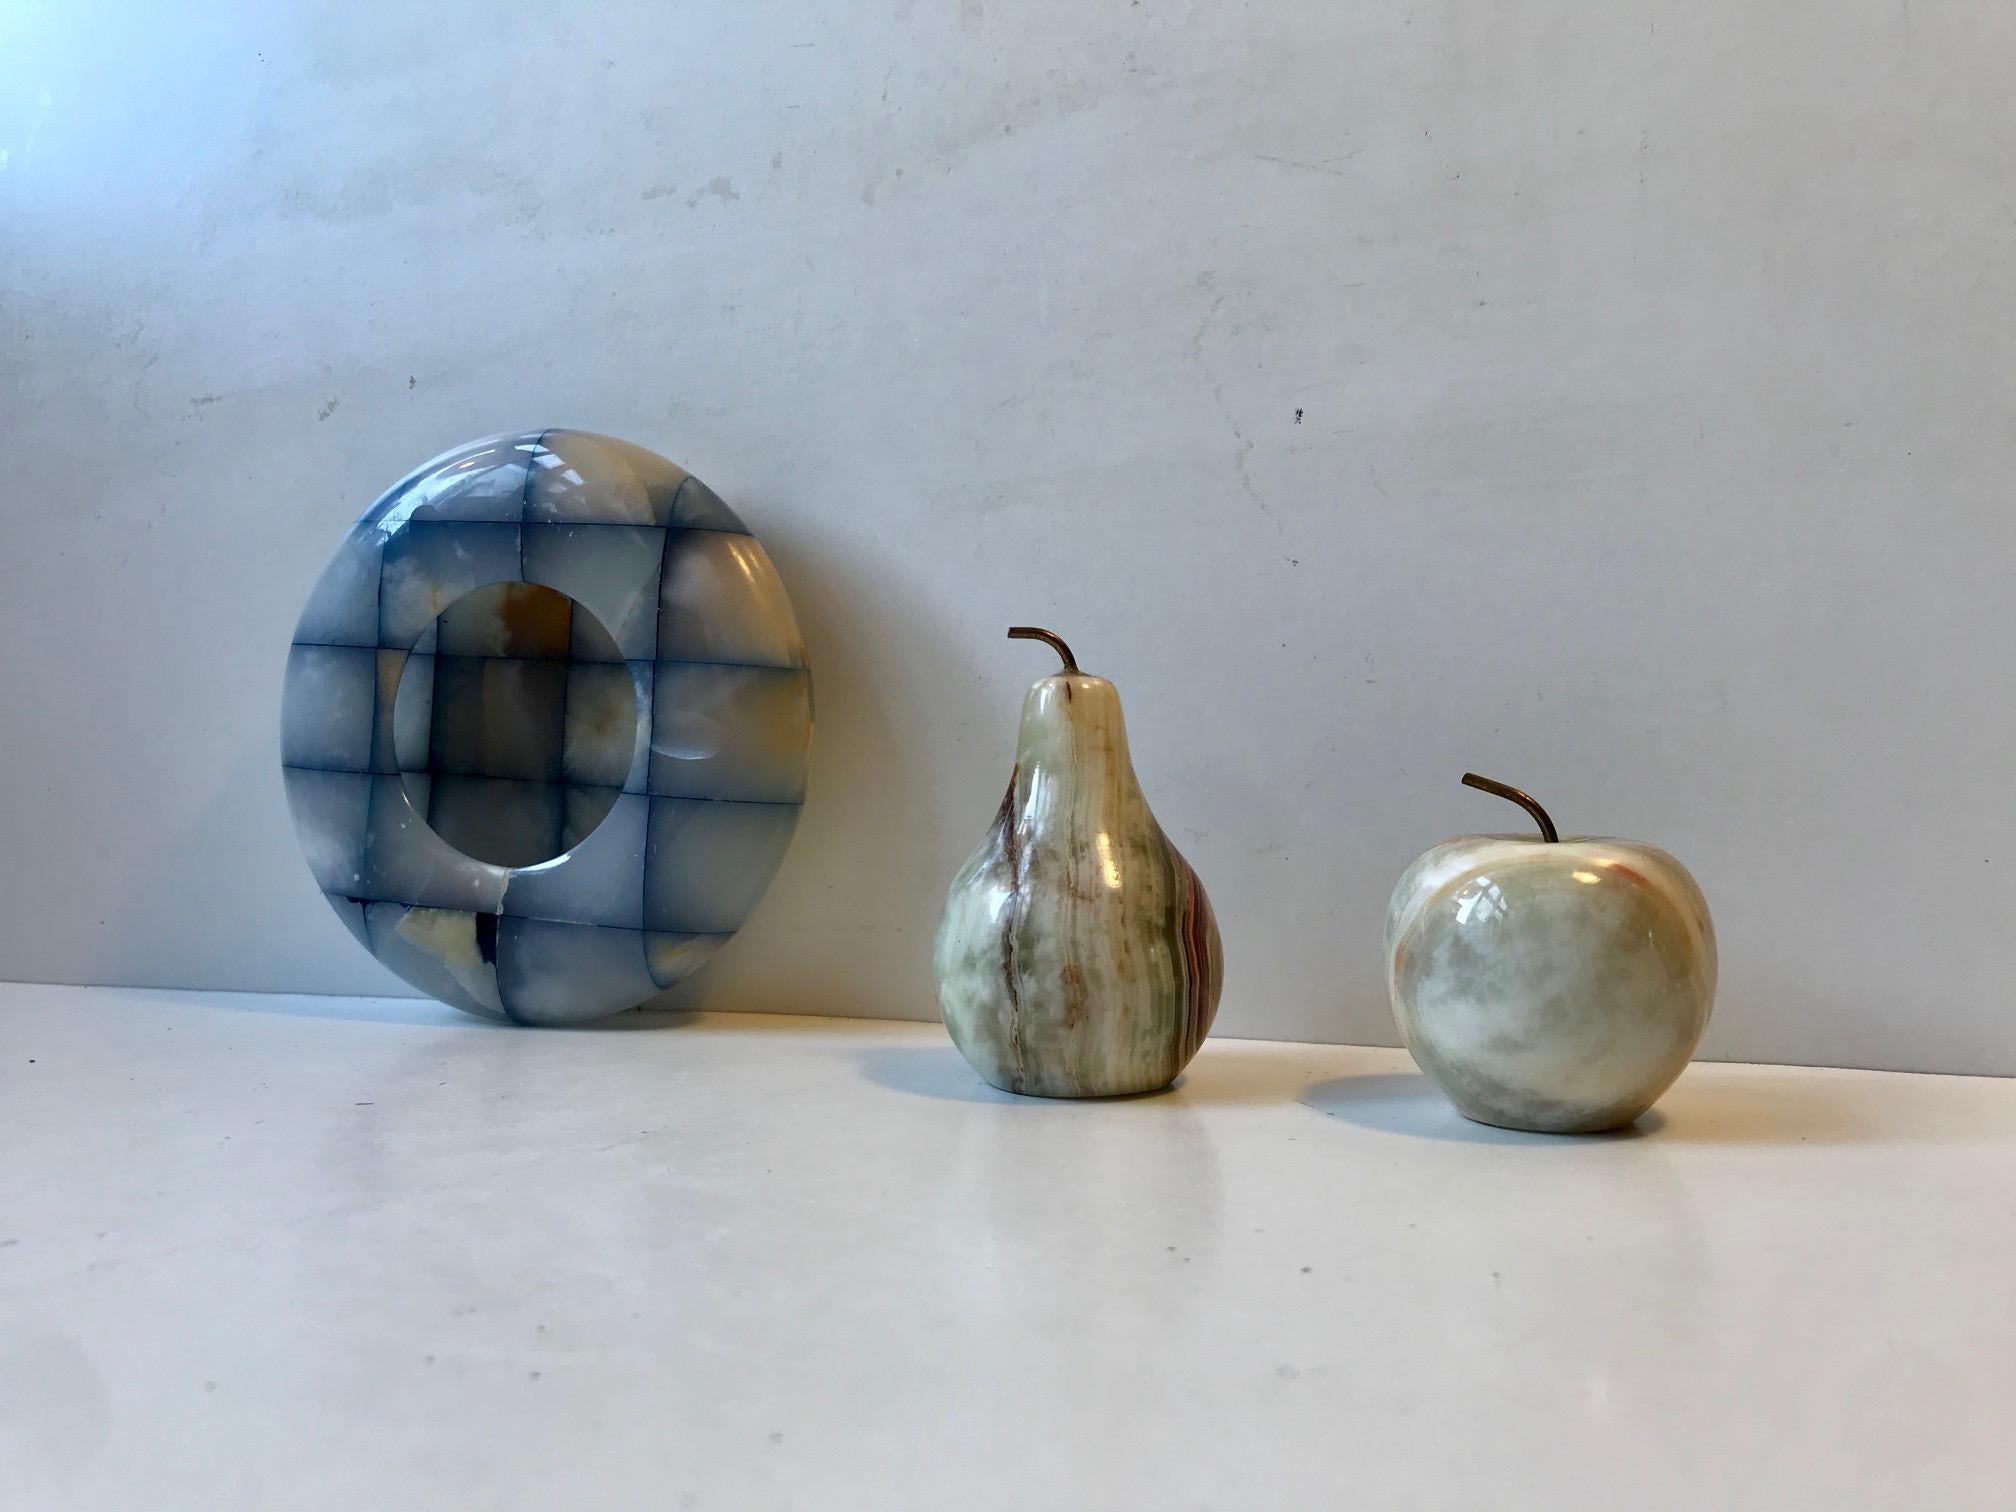 A decorative desk lot consisting of pear and able shaped paperweights with brass stems and a mosaic ashtray in Onyx marble. Manufactured in Italy during the late 1950s.